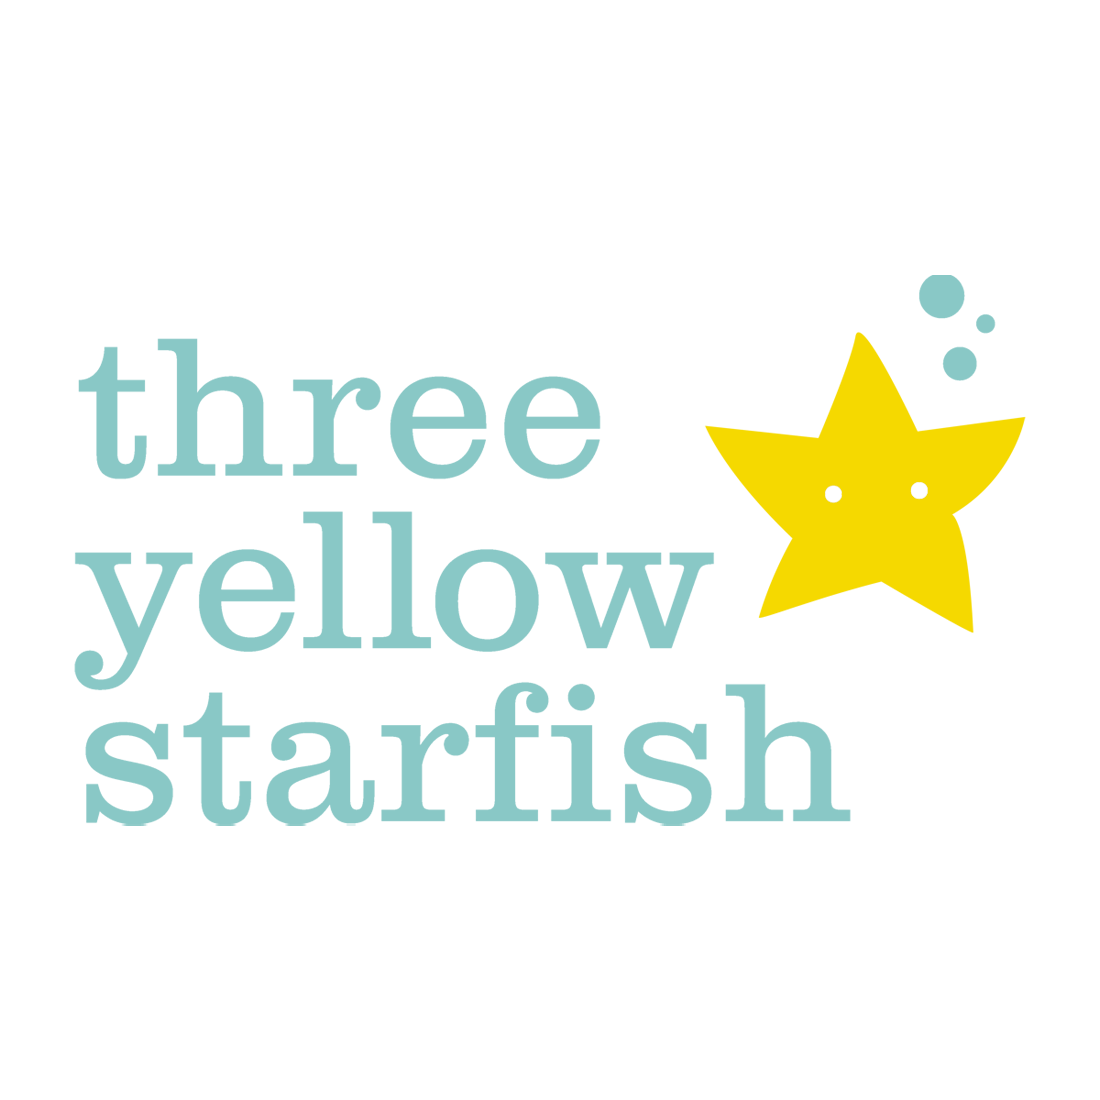 Kids Snack Bags - Reusable Insulated Pouch - Three Yellow Starfish